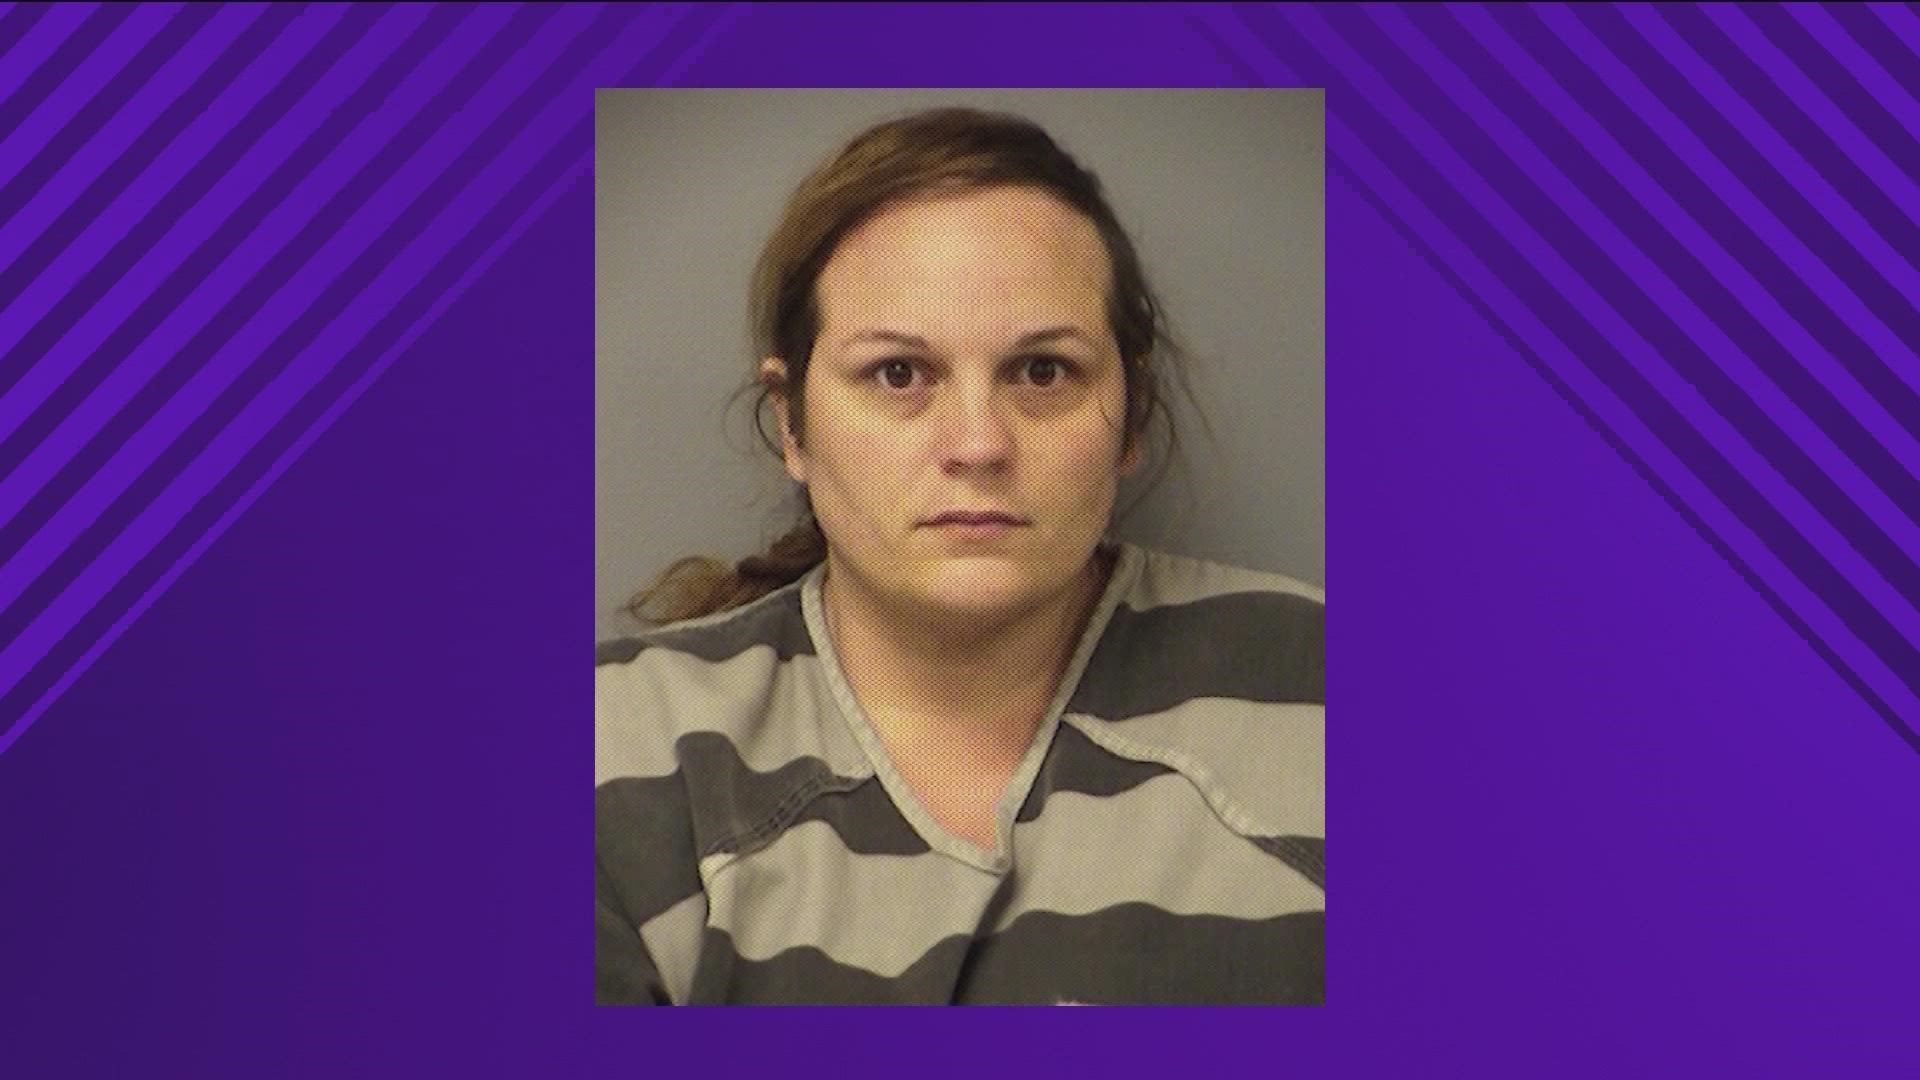 The KVUE Defenders have learned that Magen Fieramusca, who is accused of killing Heidi Broussard and kidnapping her baby, has reached a plea deal with prosecutors.